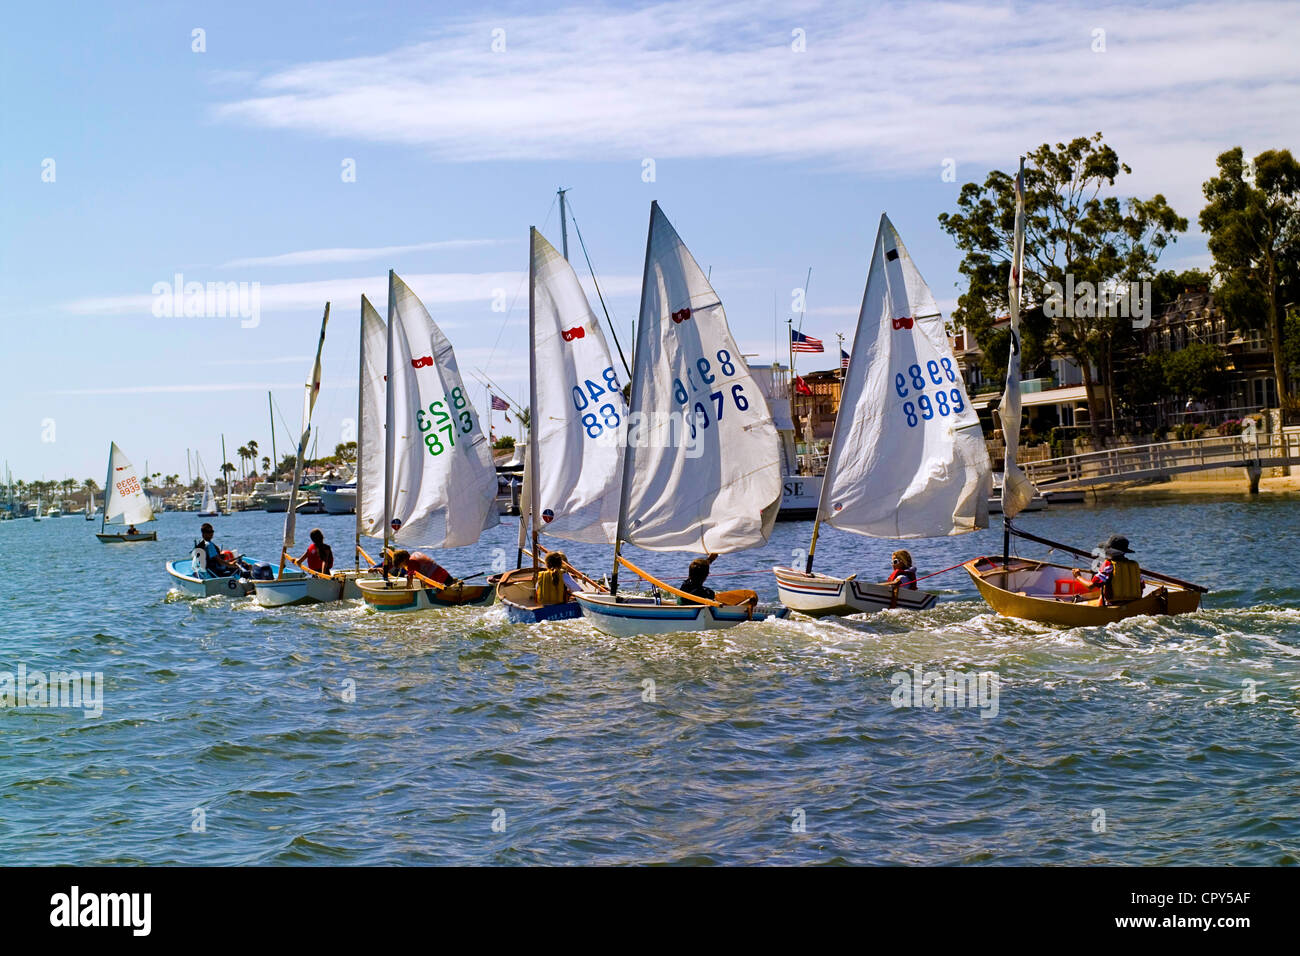 Children who learn about sailing in one-person dinghy sailboats called  Sabots are a frequent sight in Newport Harbor at Newport Beach, California,  USA Stock Photo - Alamy